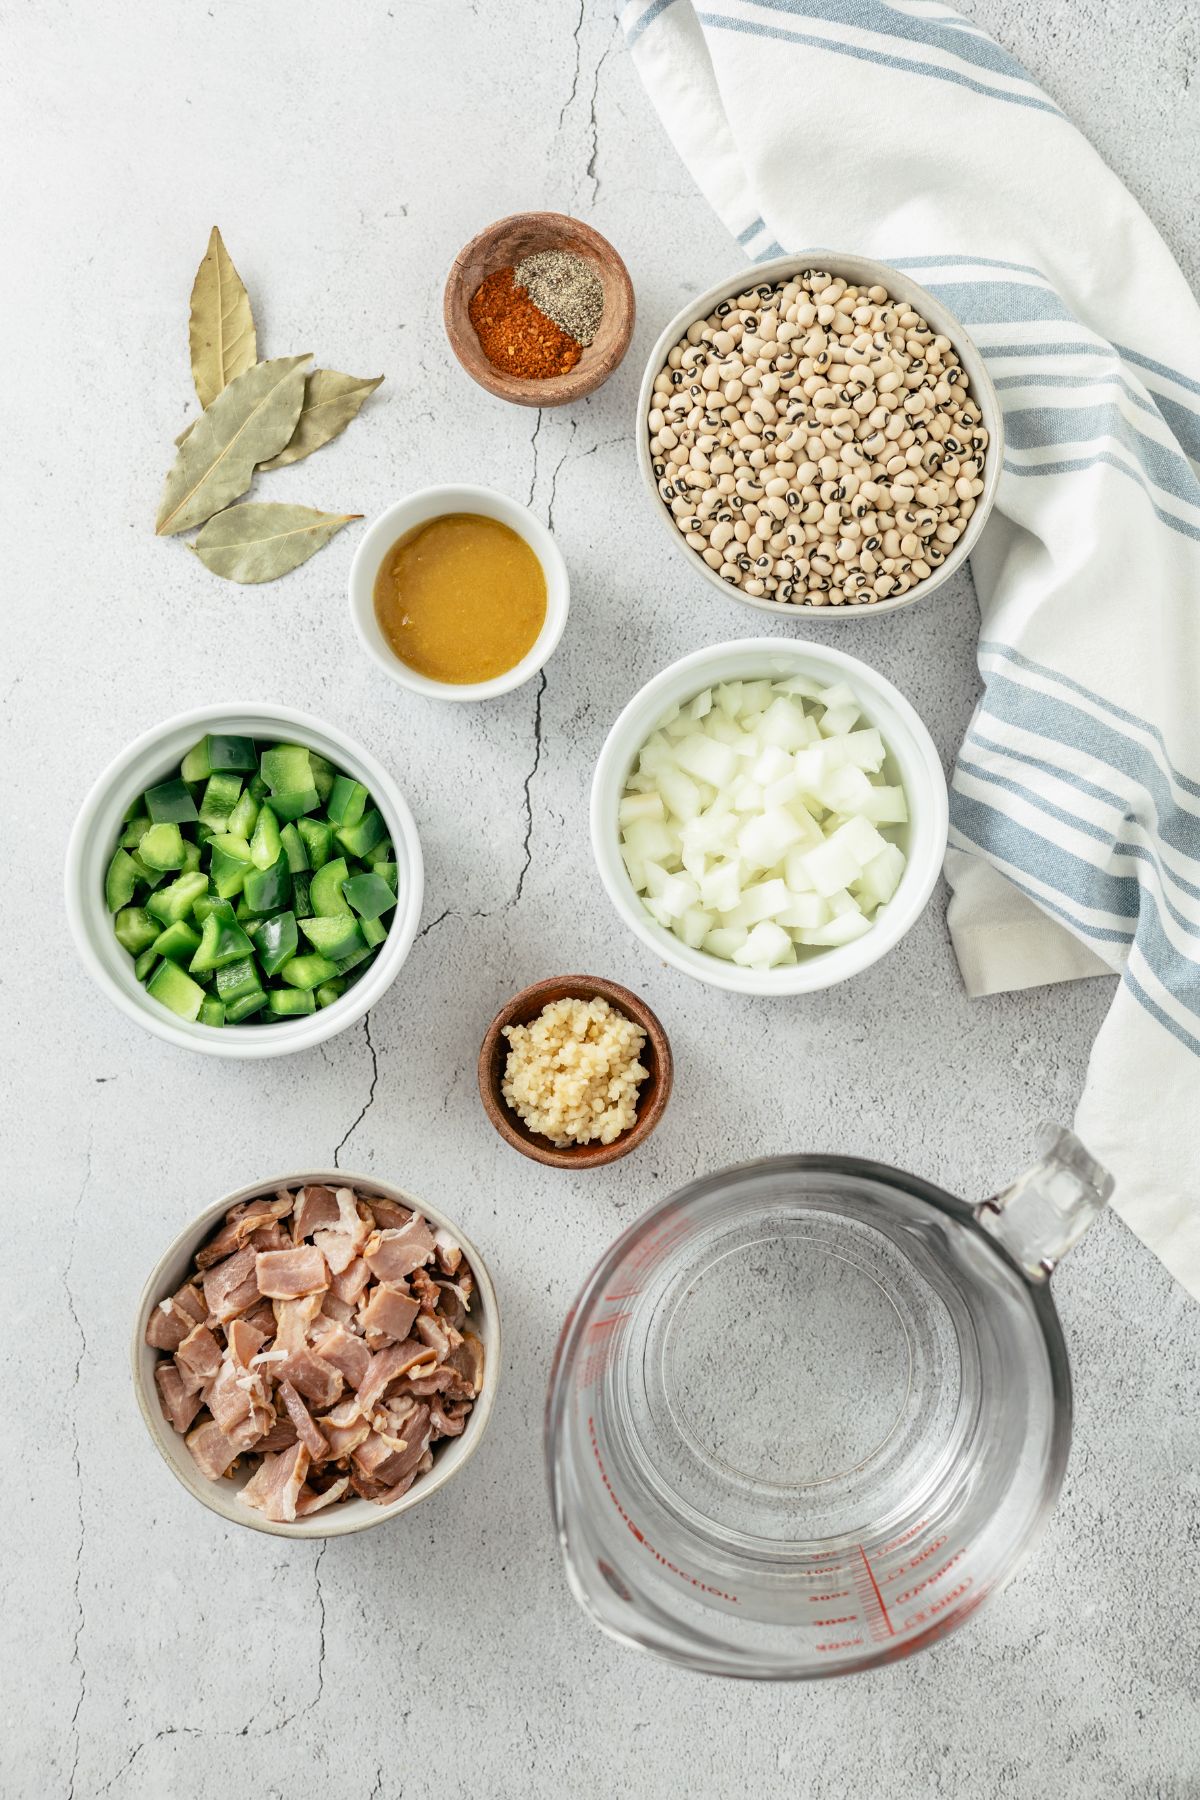 Ingredients for Black-eyed Peas Dish in separate bowls: Diced bacon, yellow onions, green bell pepper, minced garlic, dried black-eyed peas, water, chicken bouillon, bay leaves, black pepper, Cajun seasoning